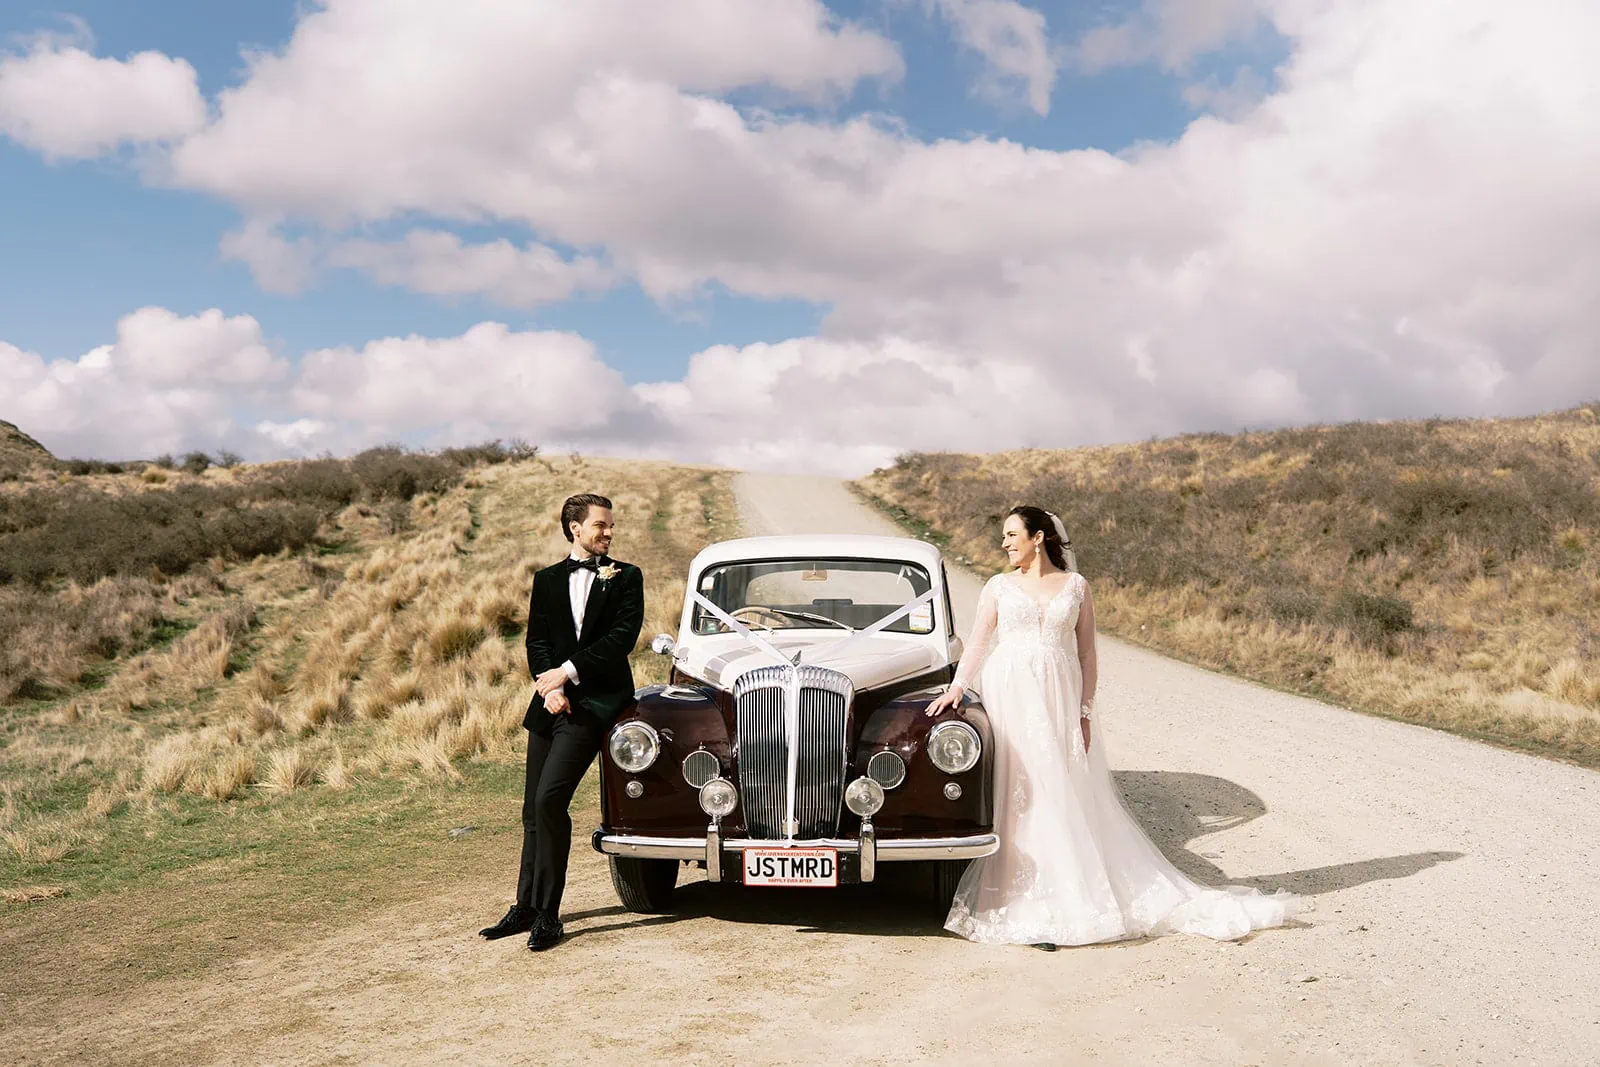 Queenstown Wedding Photographer Nat & Tim, a bride and groom, standing next to a vintage car on a dirt road during their Queenstown elopement wedding at Deer Park Heights.